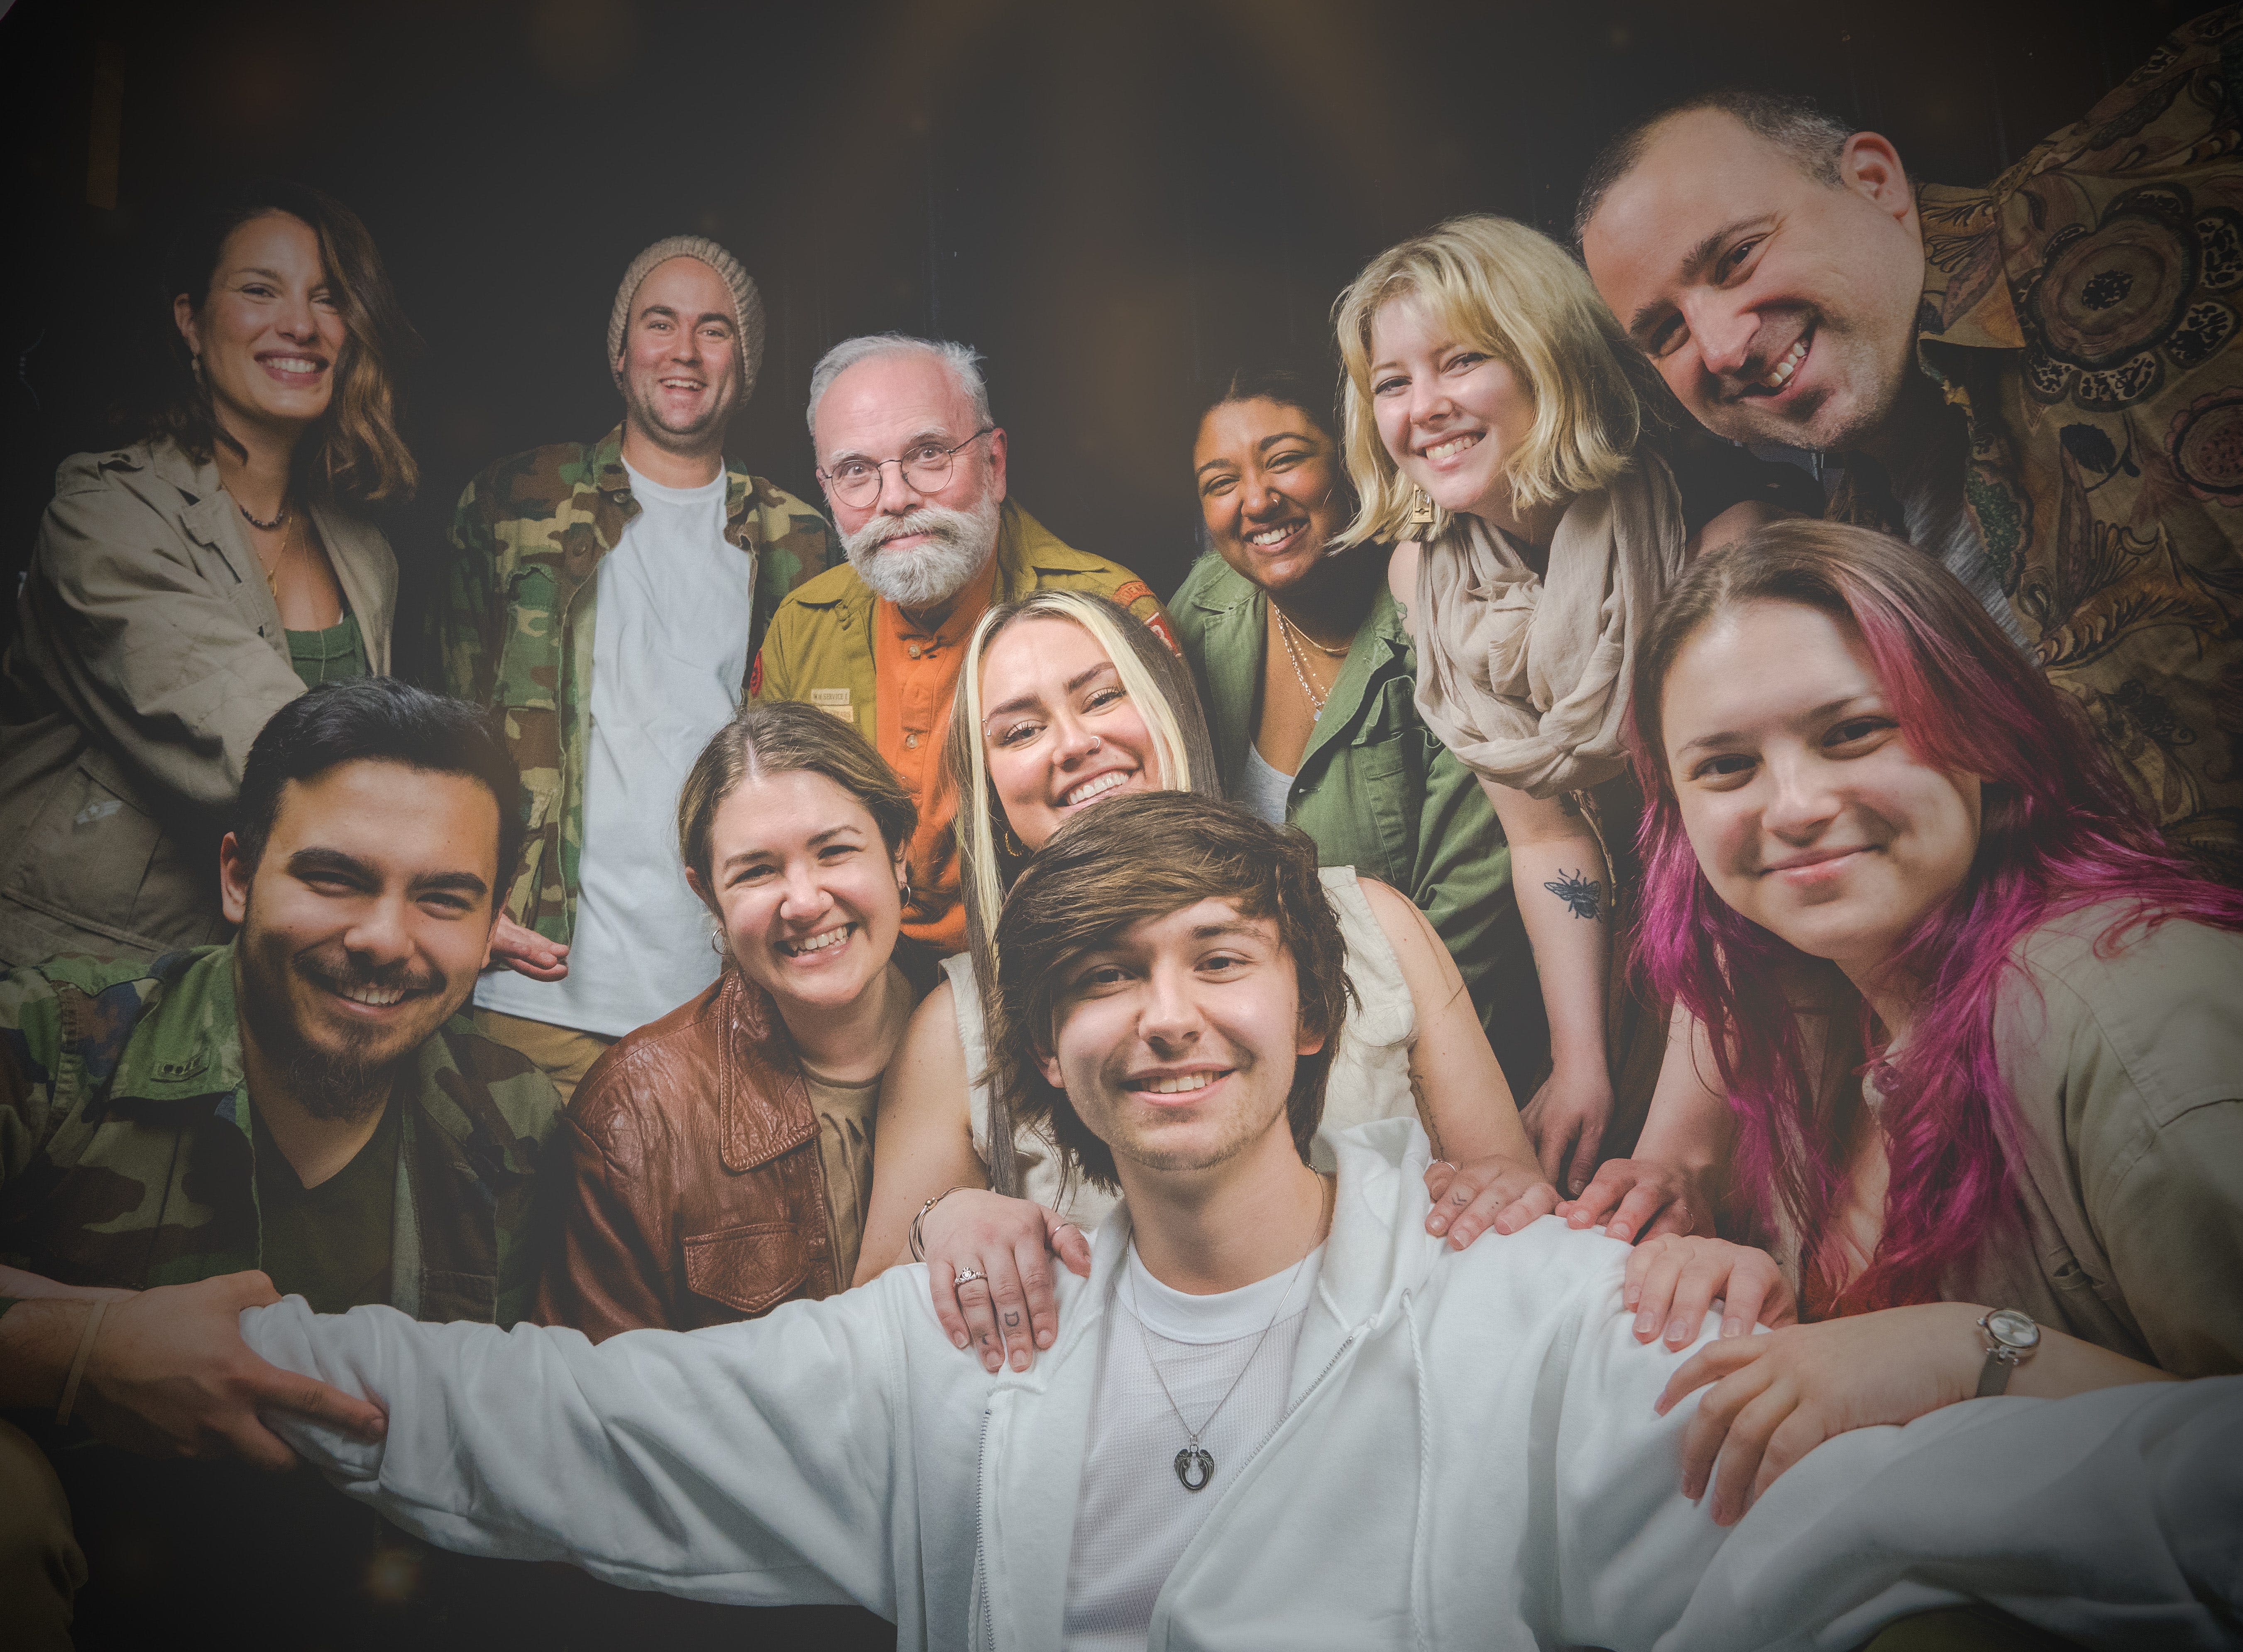 Little Theatre, Narrows Center team up for first time with 'Jesus Christ Superstar'